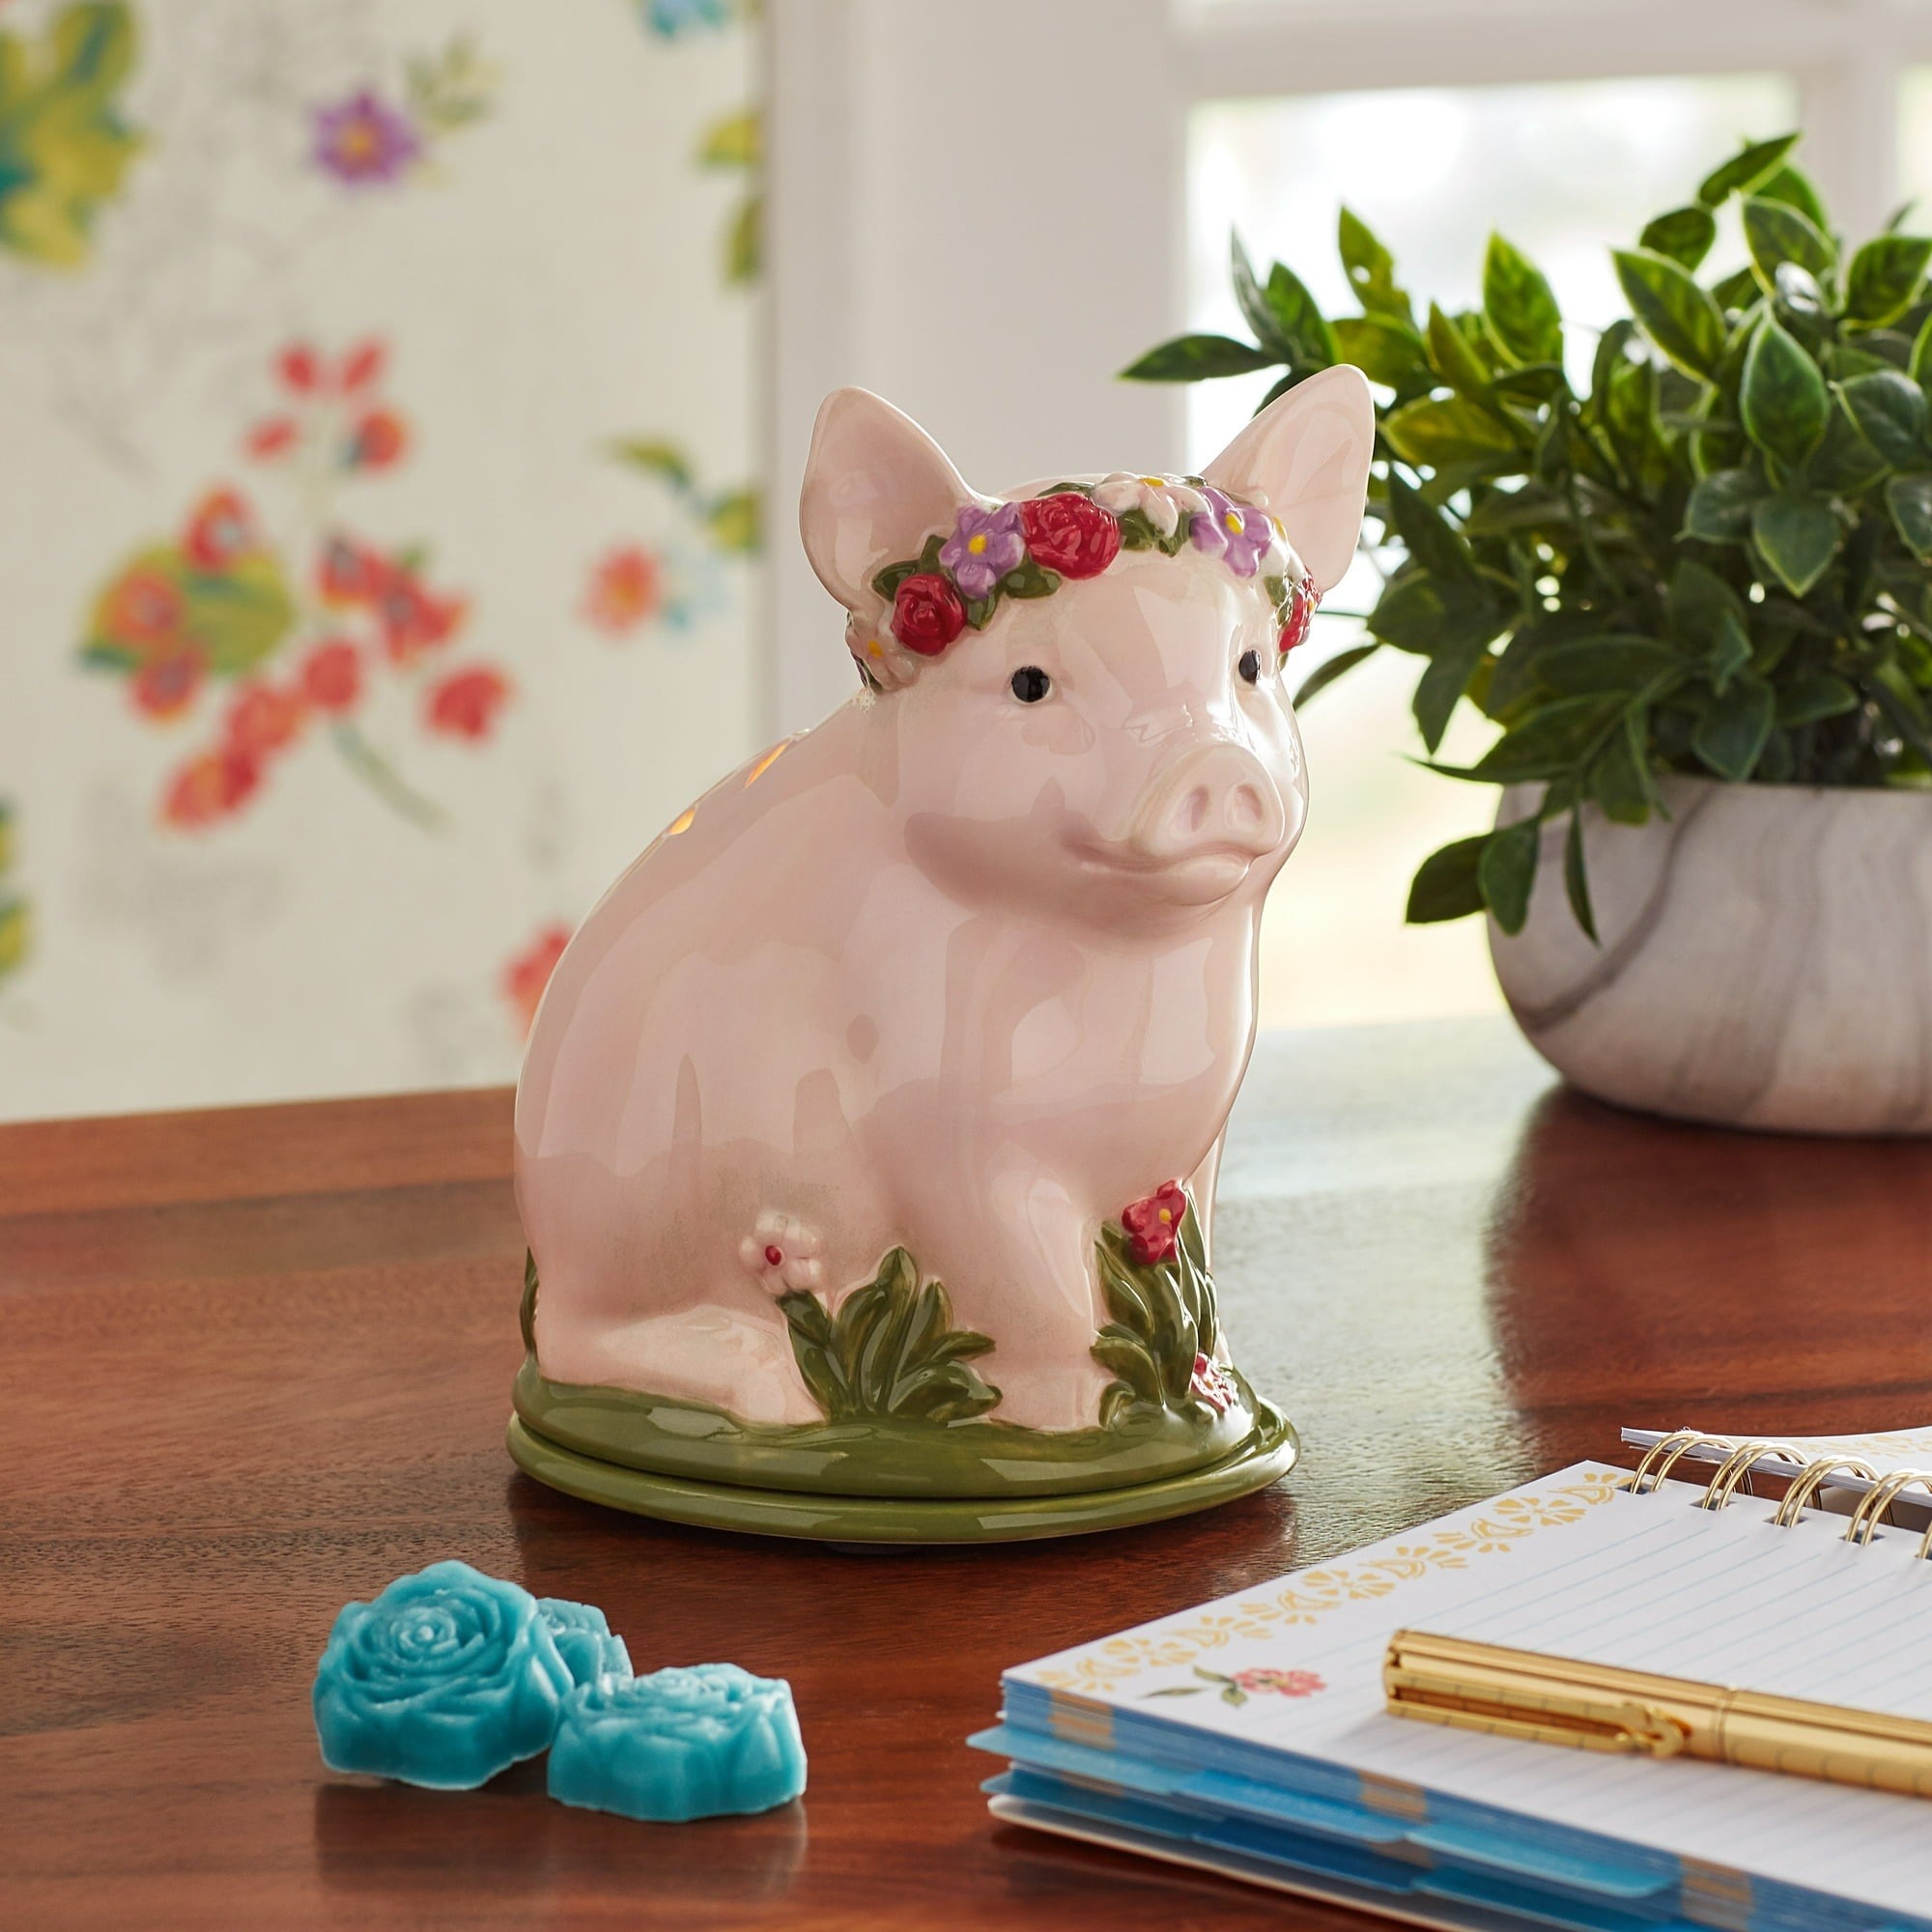 the pig fragrance warmer with a flower crown on a table